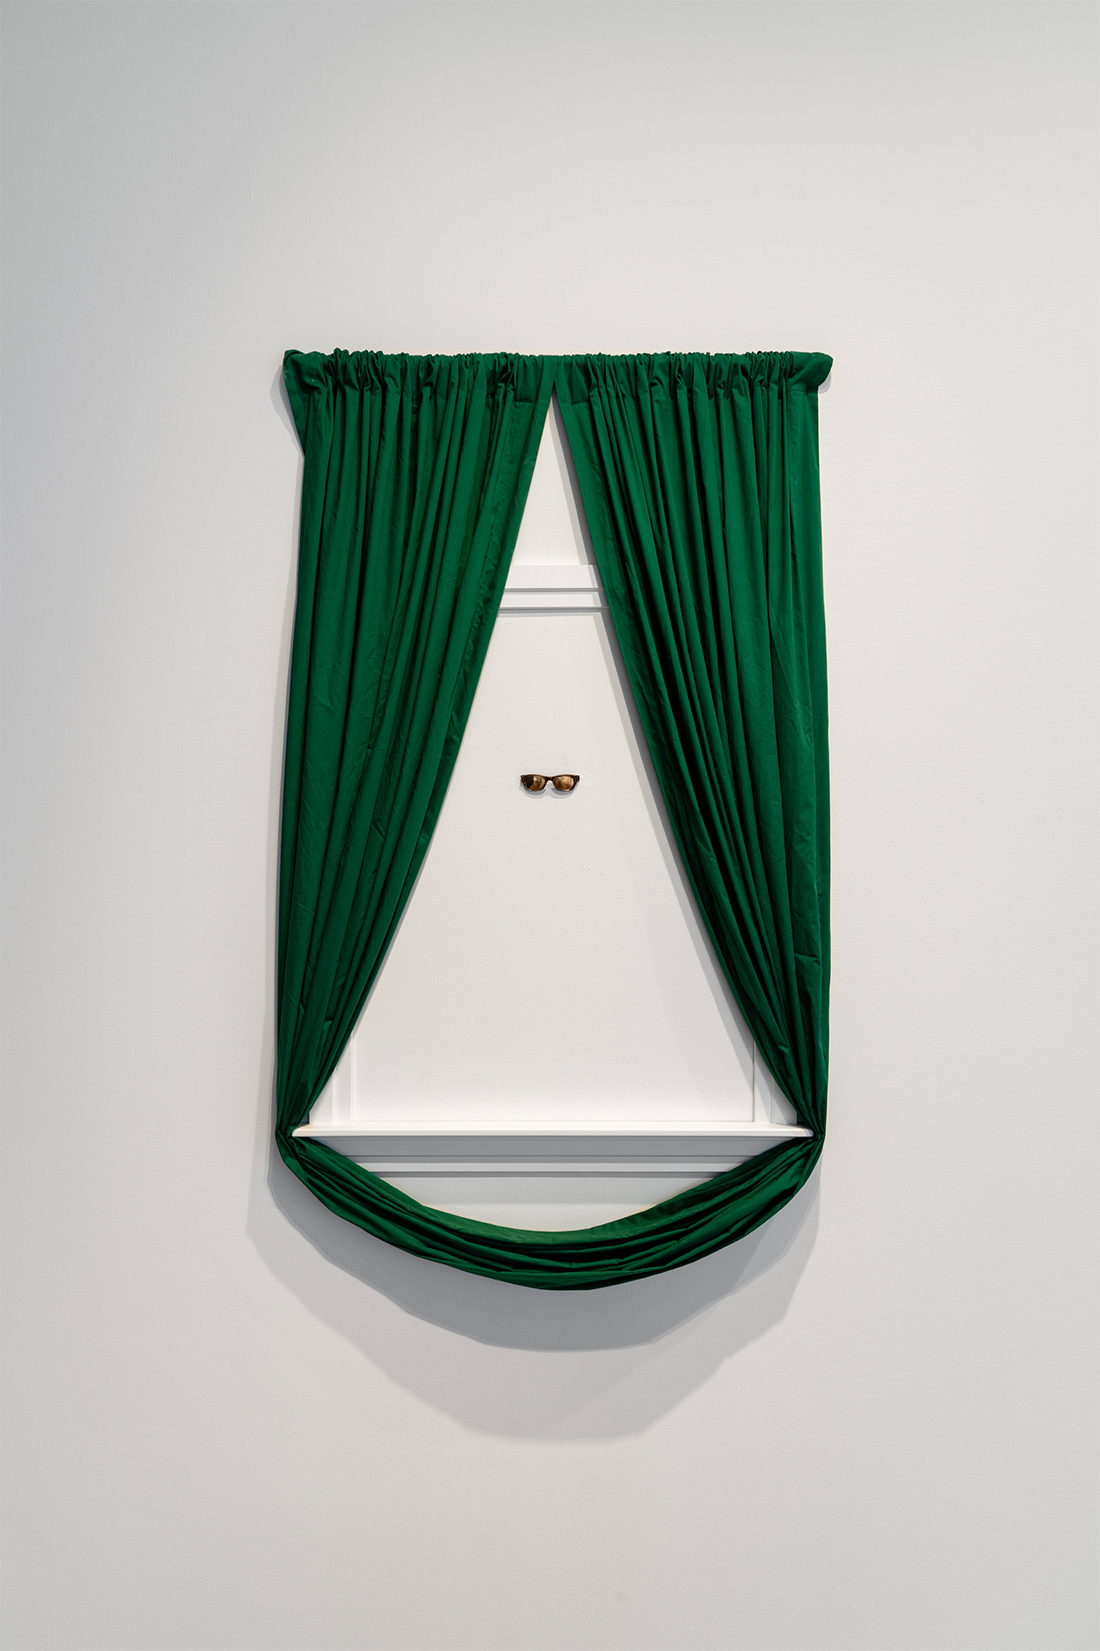 Green curtains surround a white window frame attached to the wall. A pair of sunglasses is affixed to the wall, roughly centered in the frame.